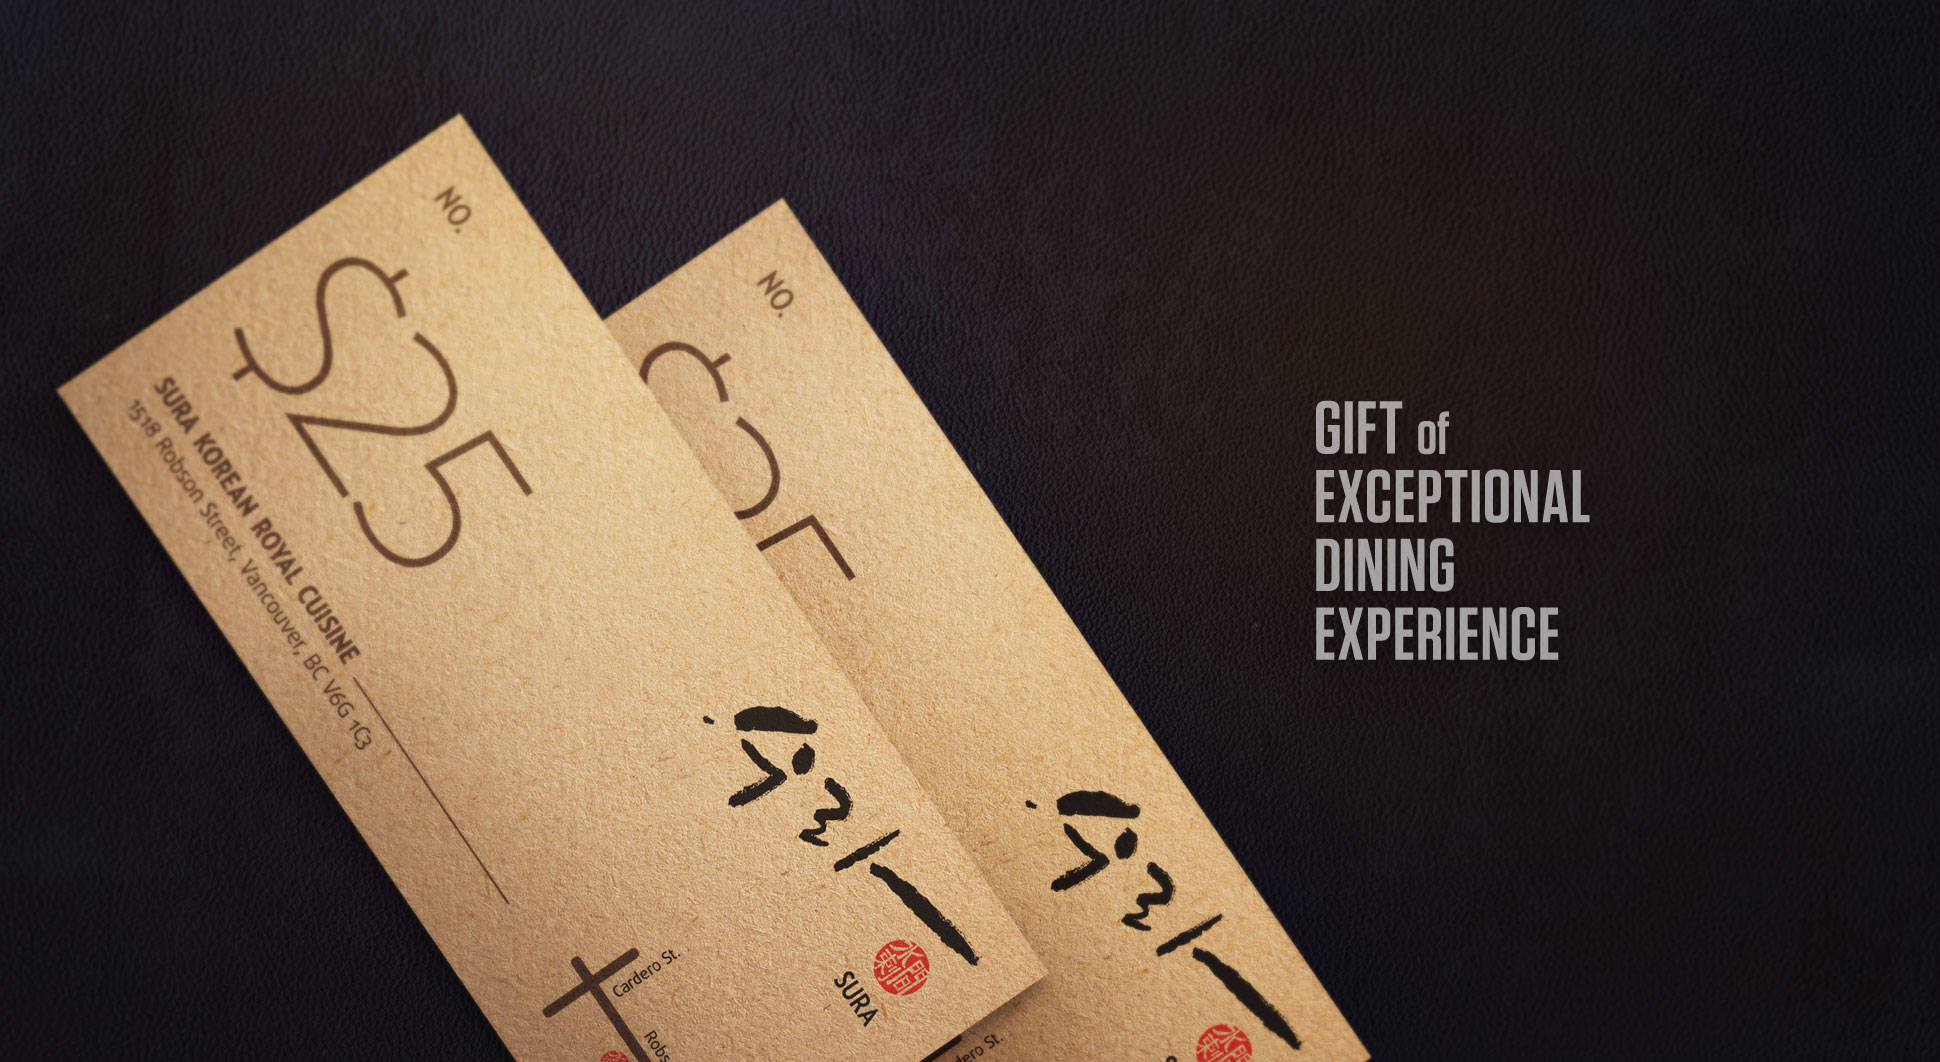 Gift of exceptional dining experience